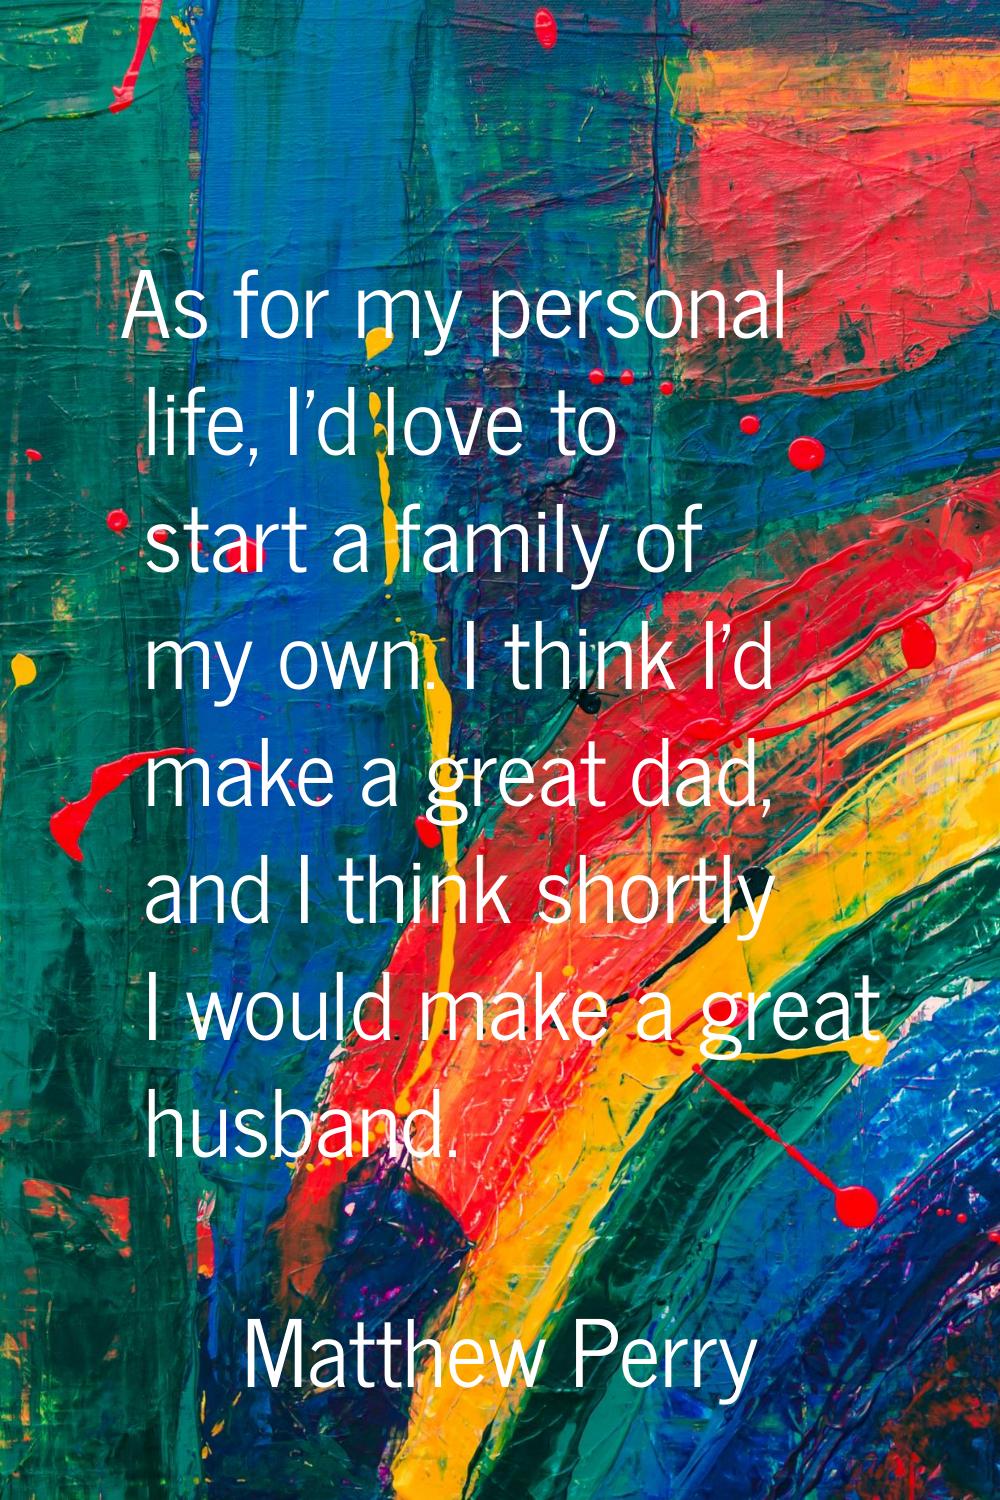 As for my personal life, I'd love to start a family of my own. I think I'd make a great dad, and I 